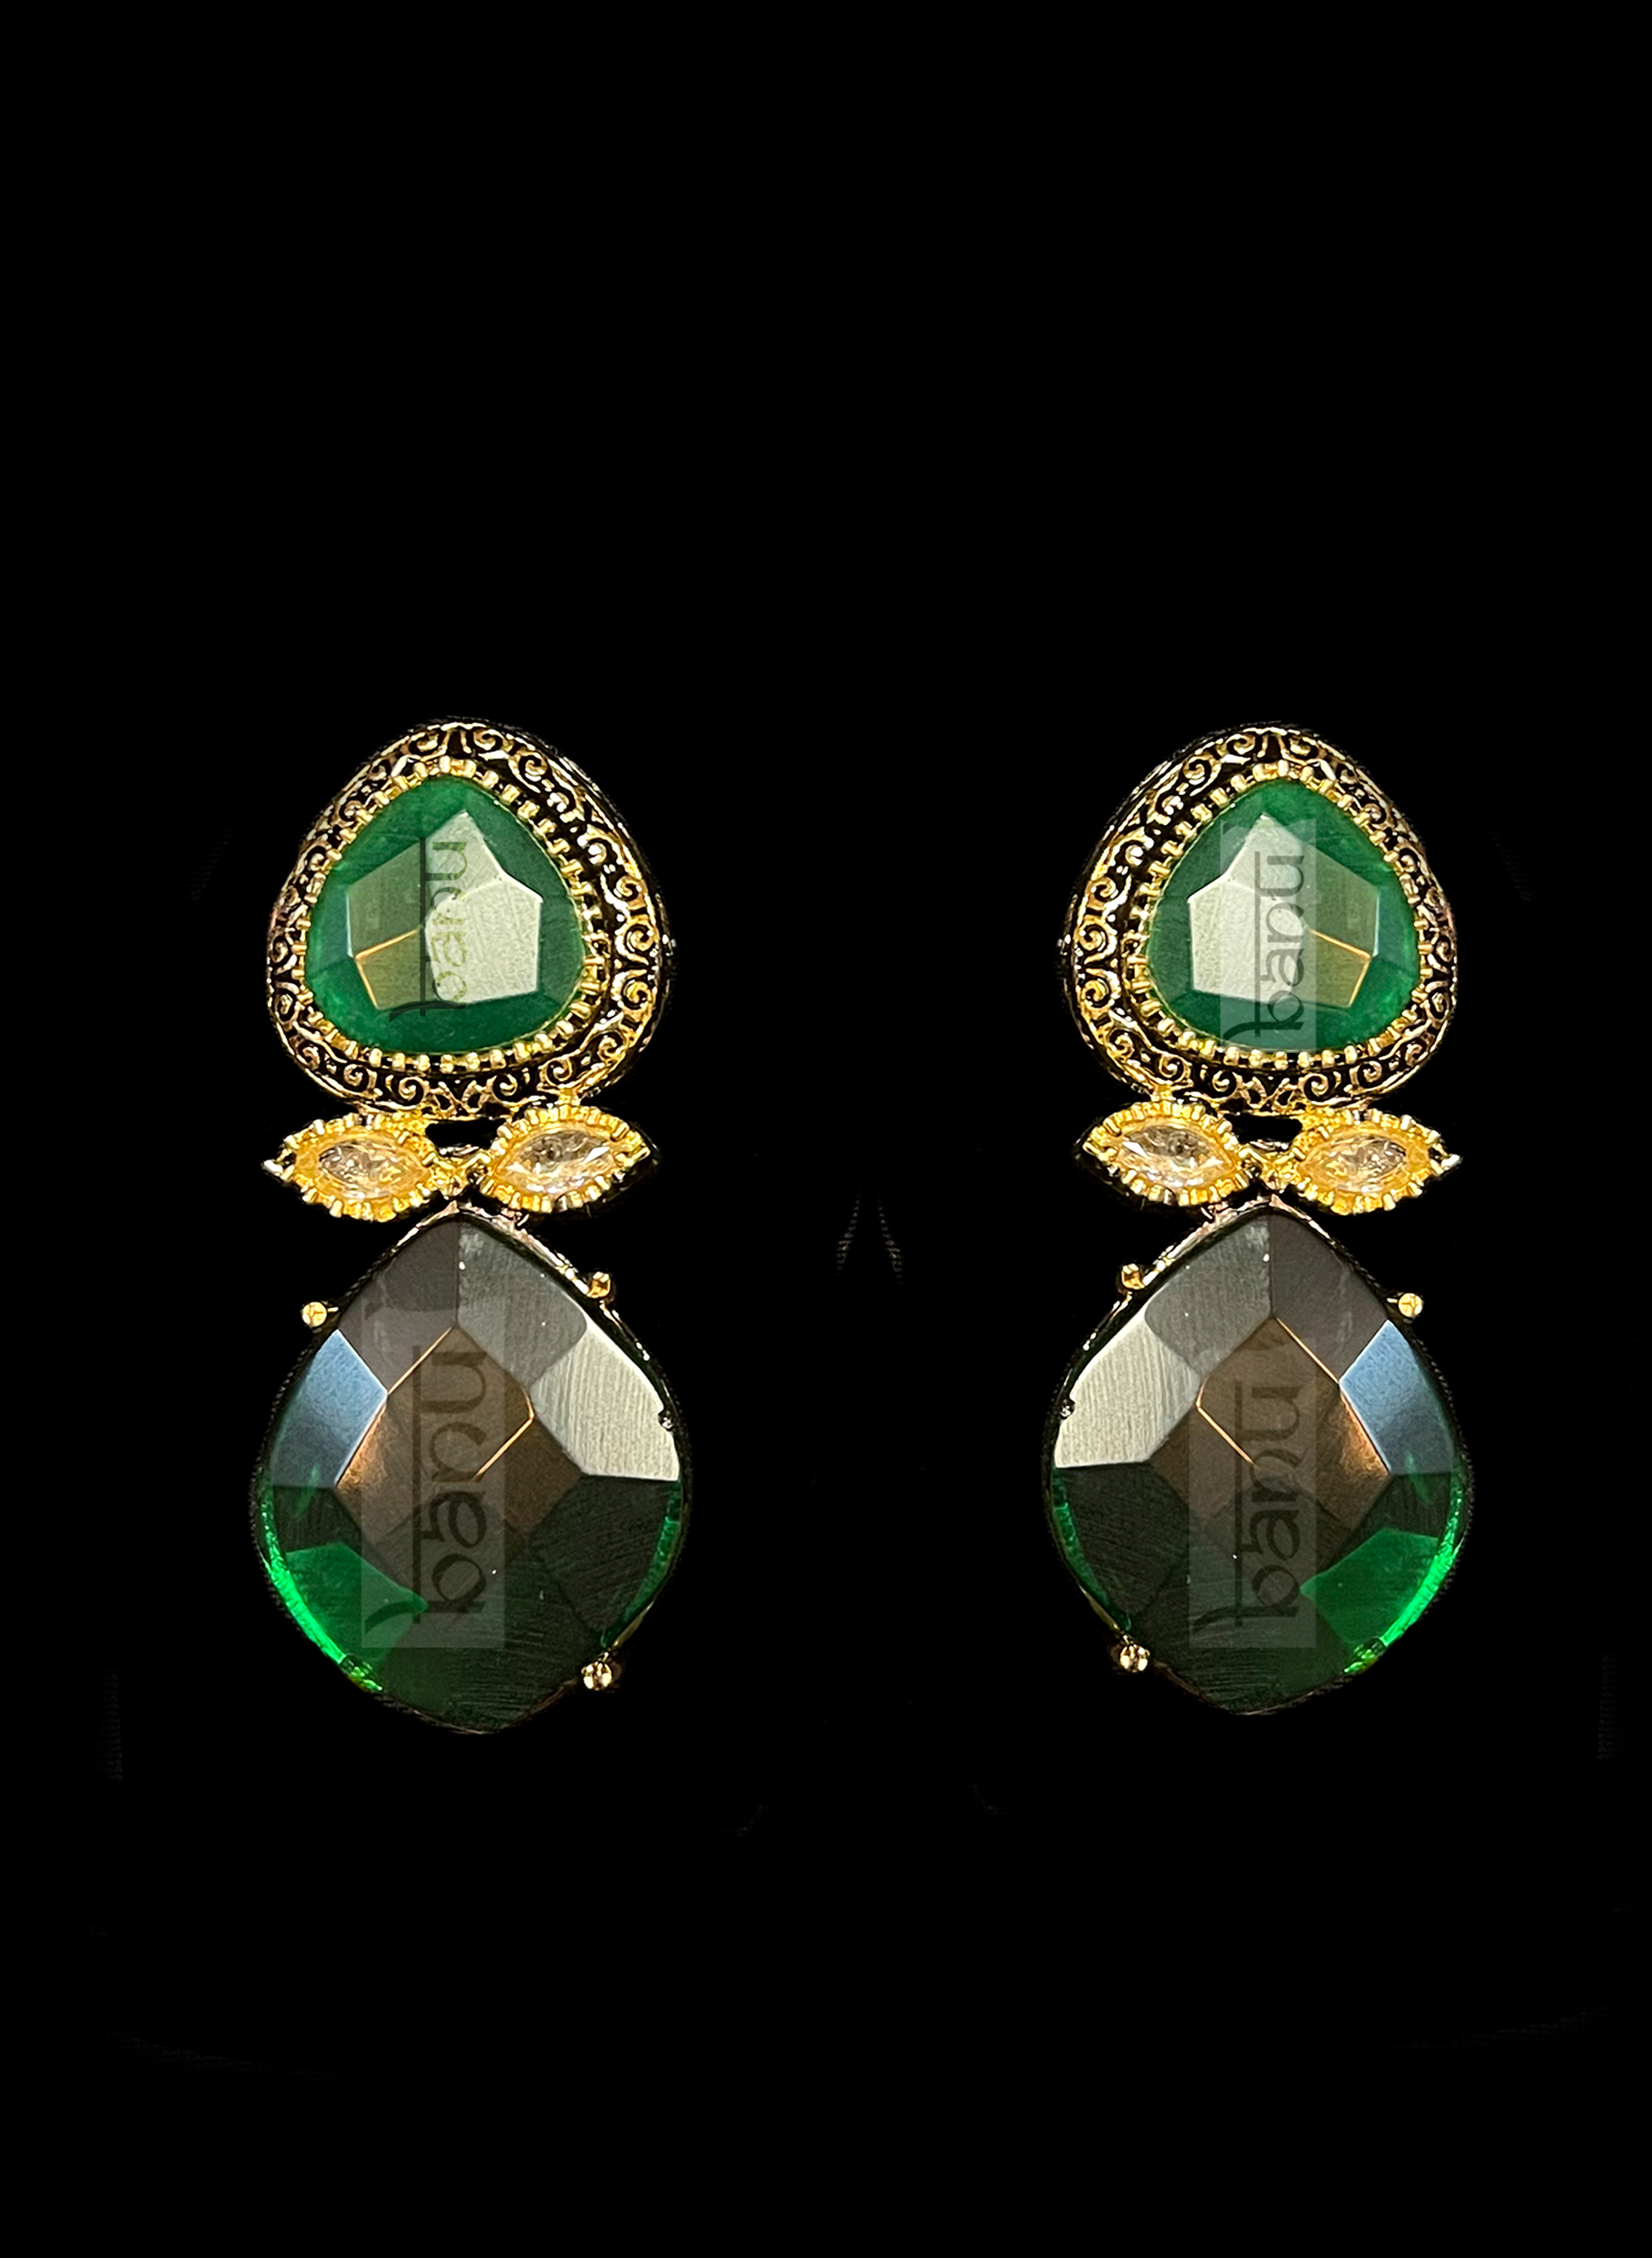 Green onyx earrings in gold plated metal for Indian Brides of the USA